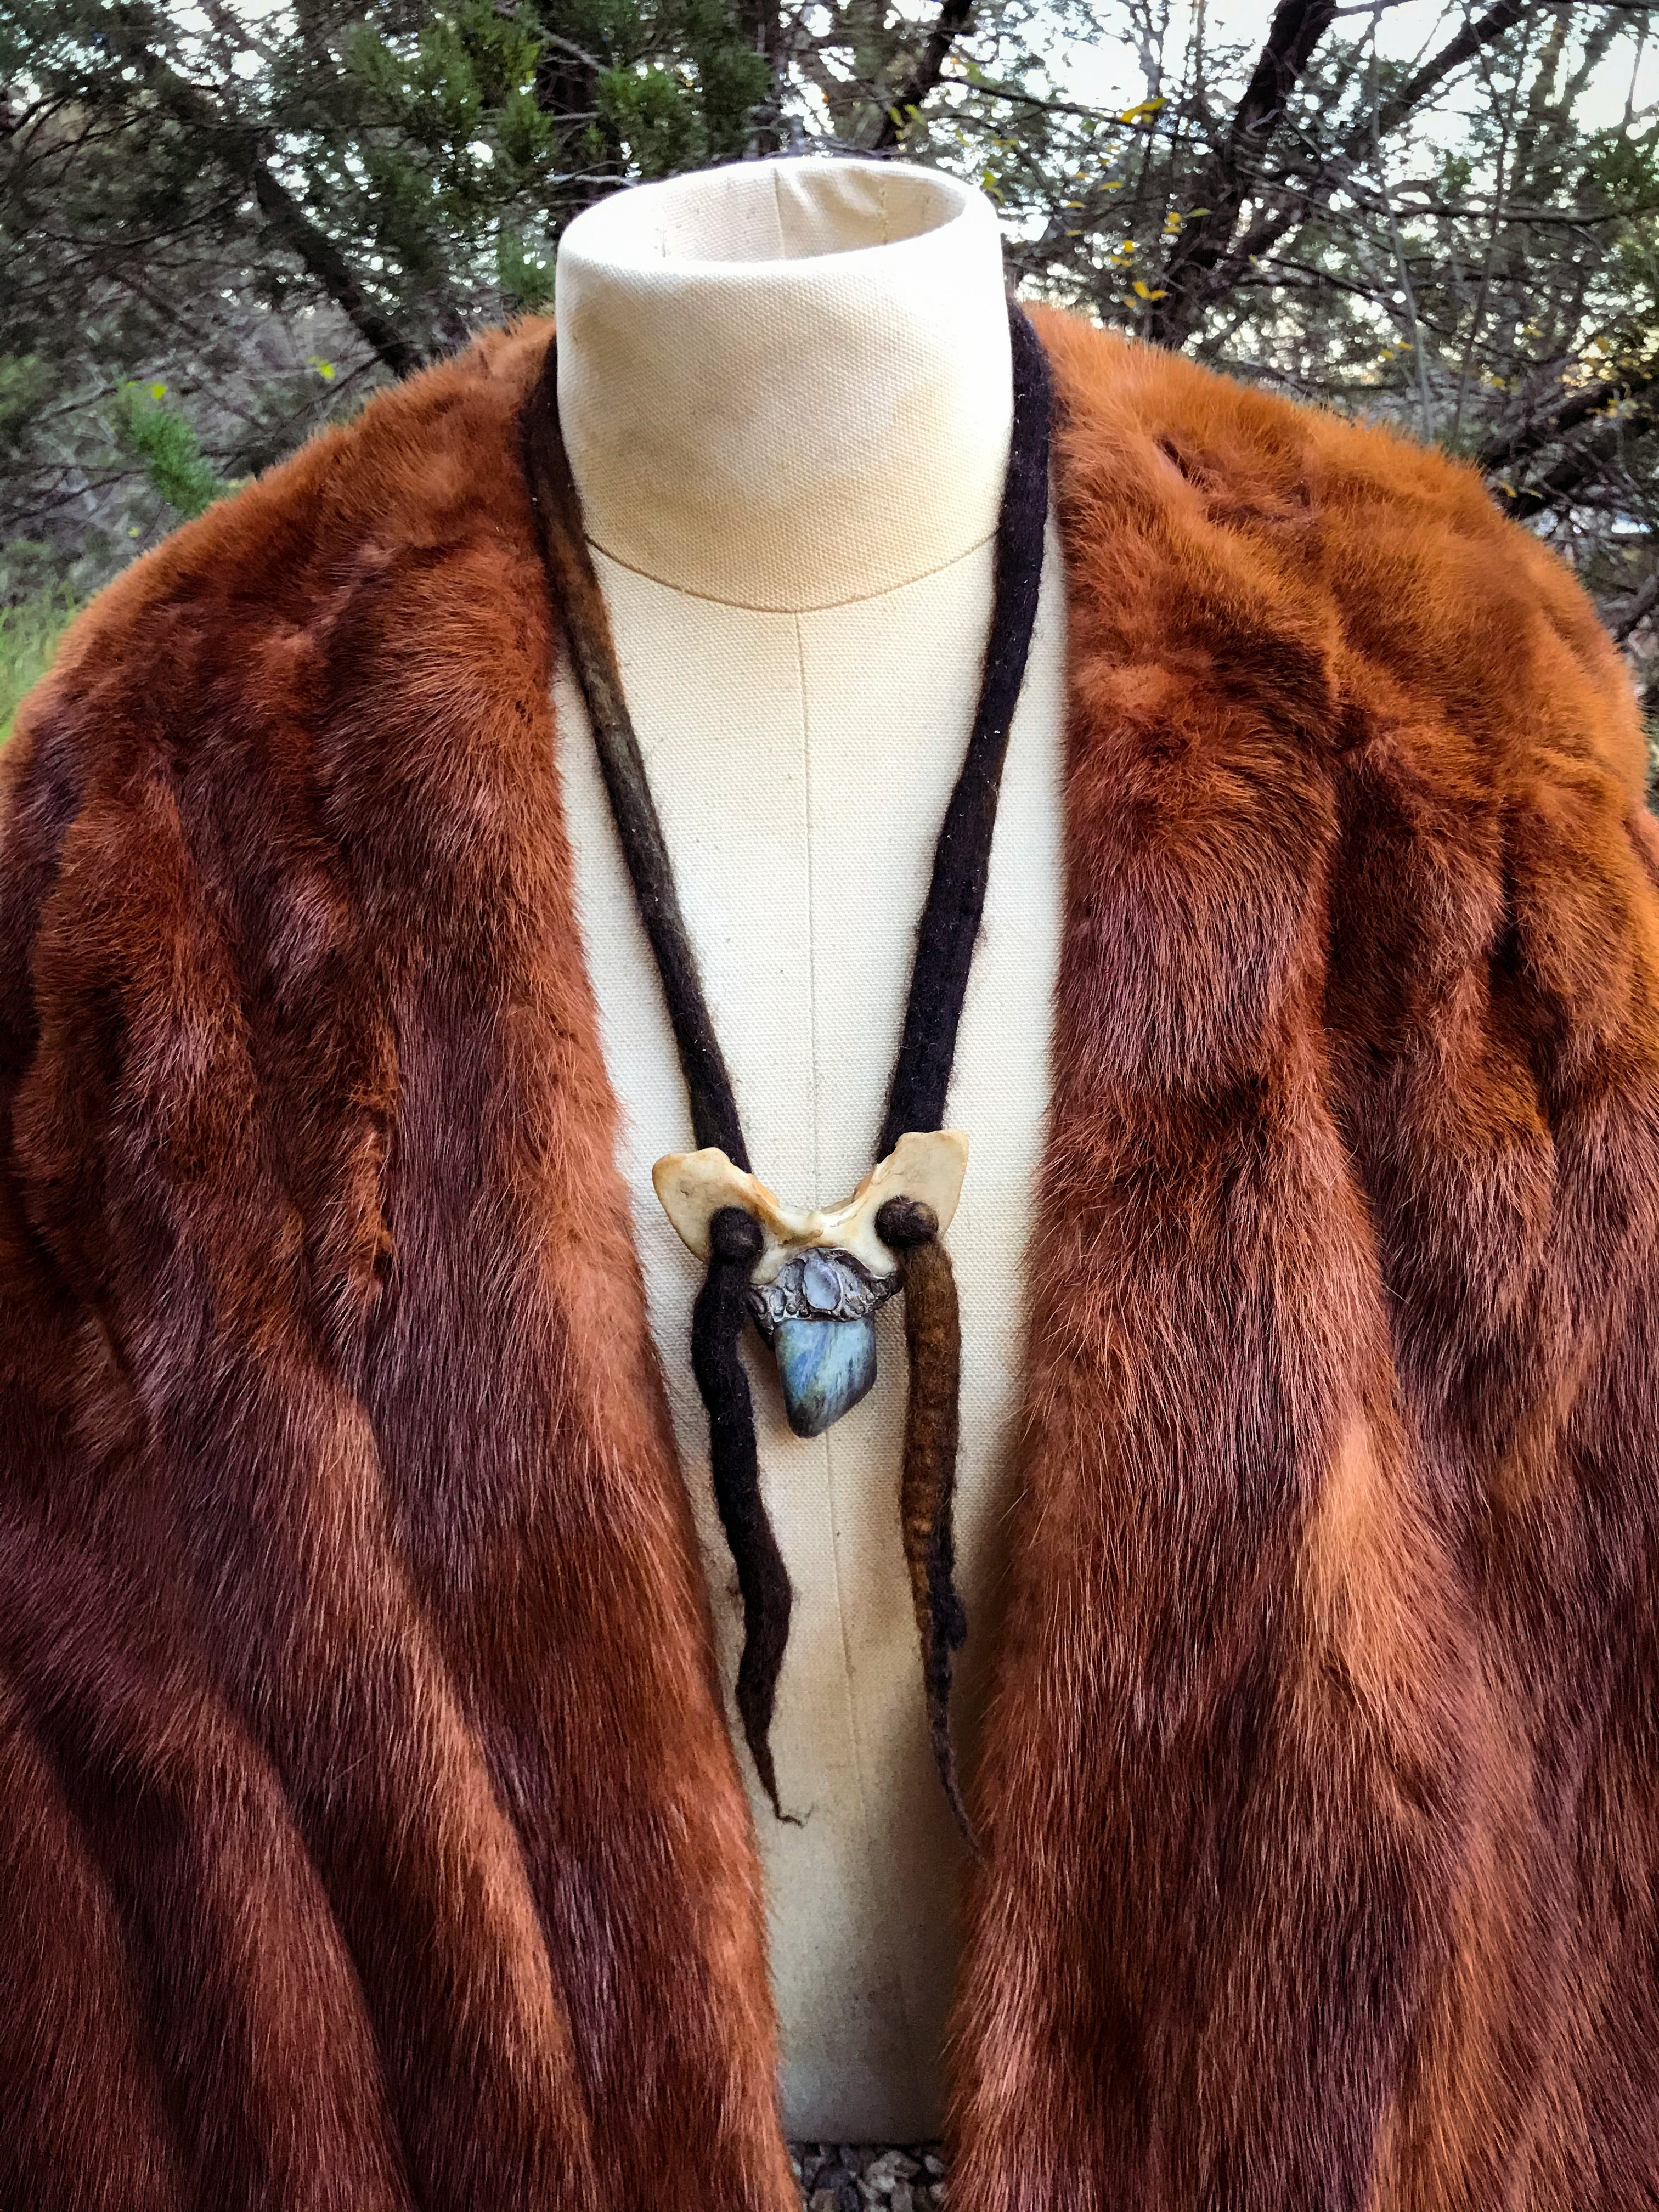 Wild Creatrix Necklace for Fierce Creativity and Self Awareness